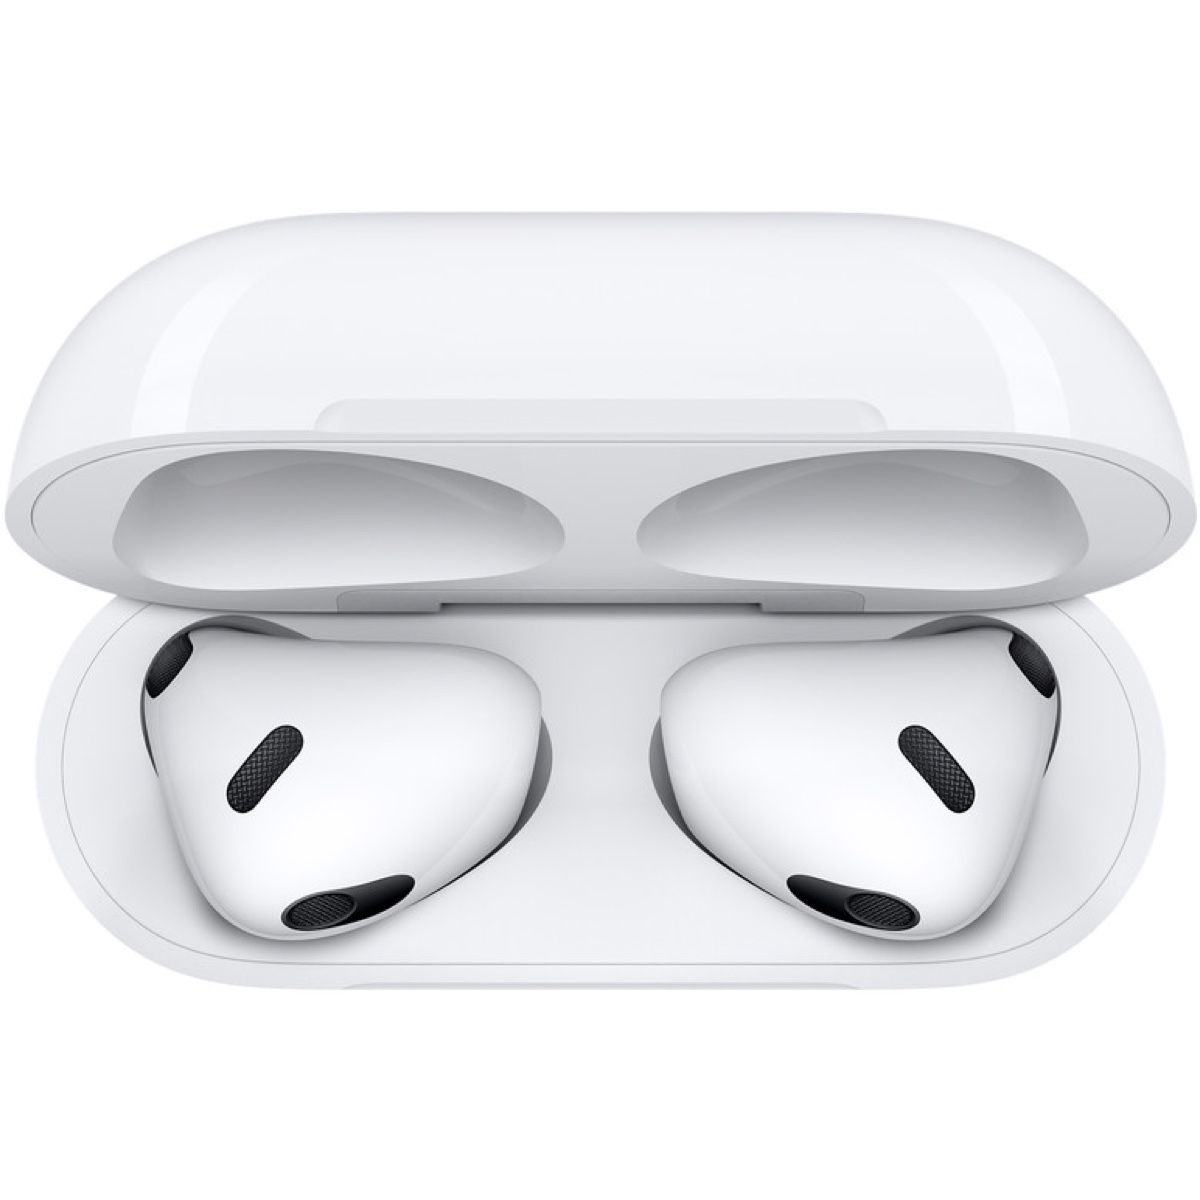 Apple Airpods (3rd generation) Wit